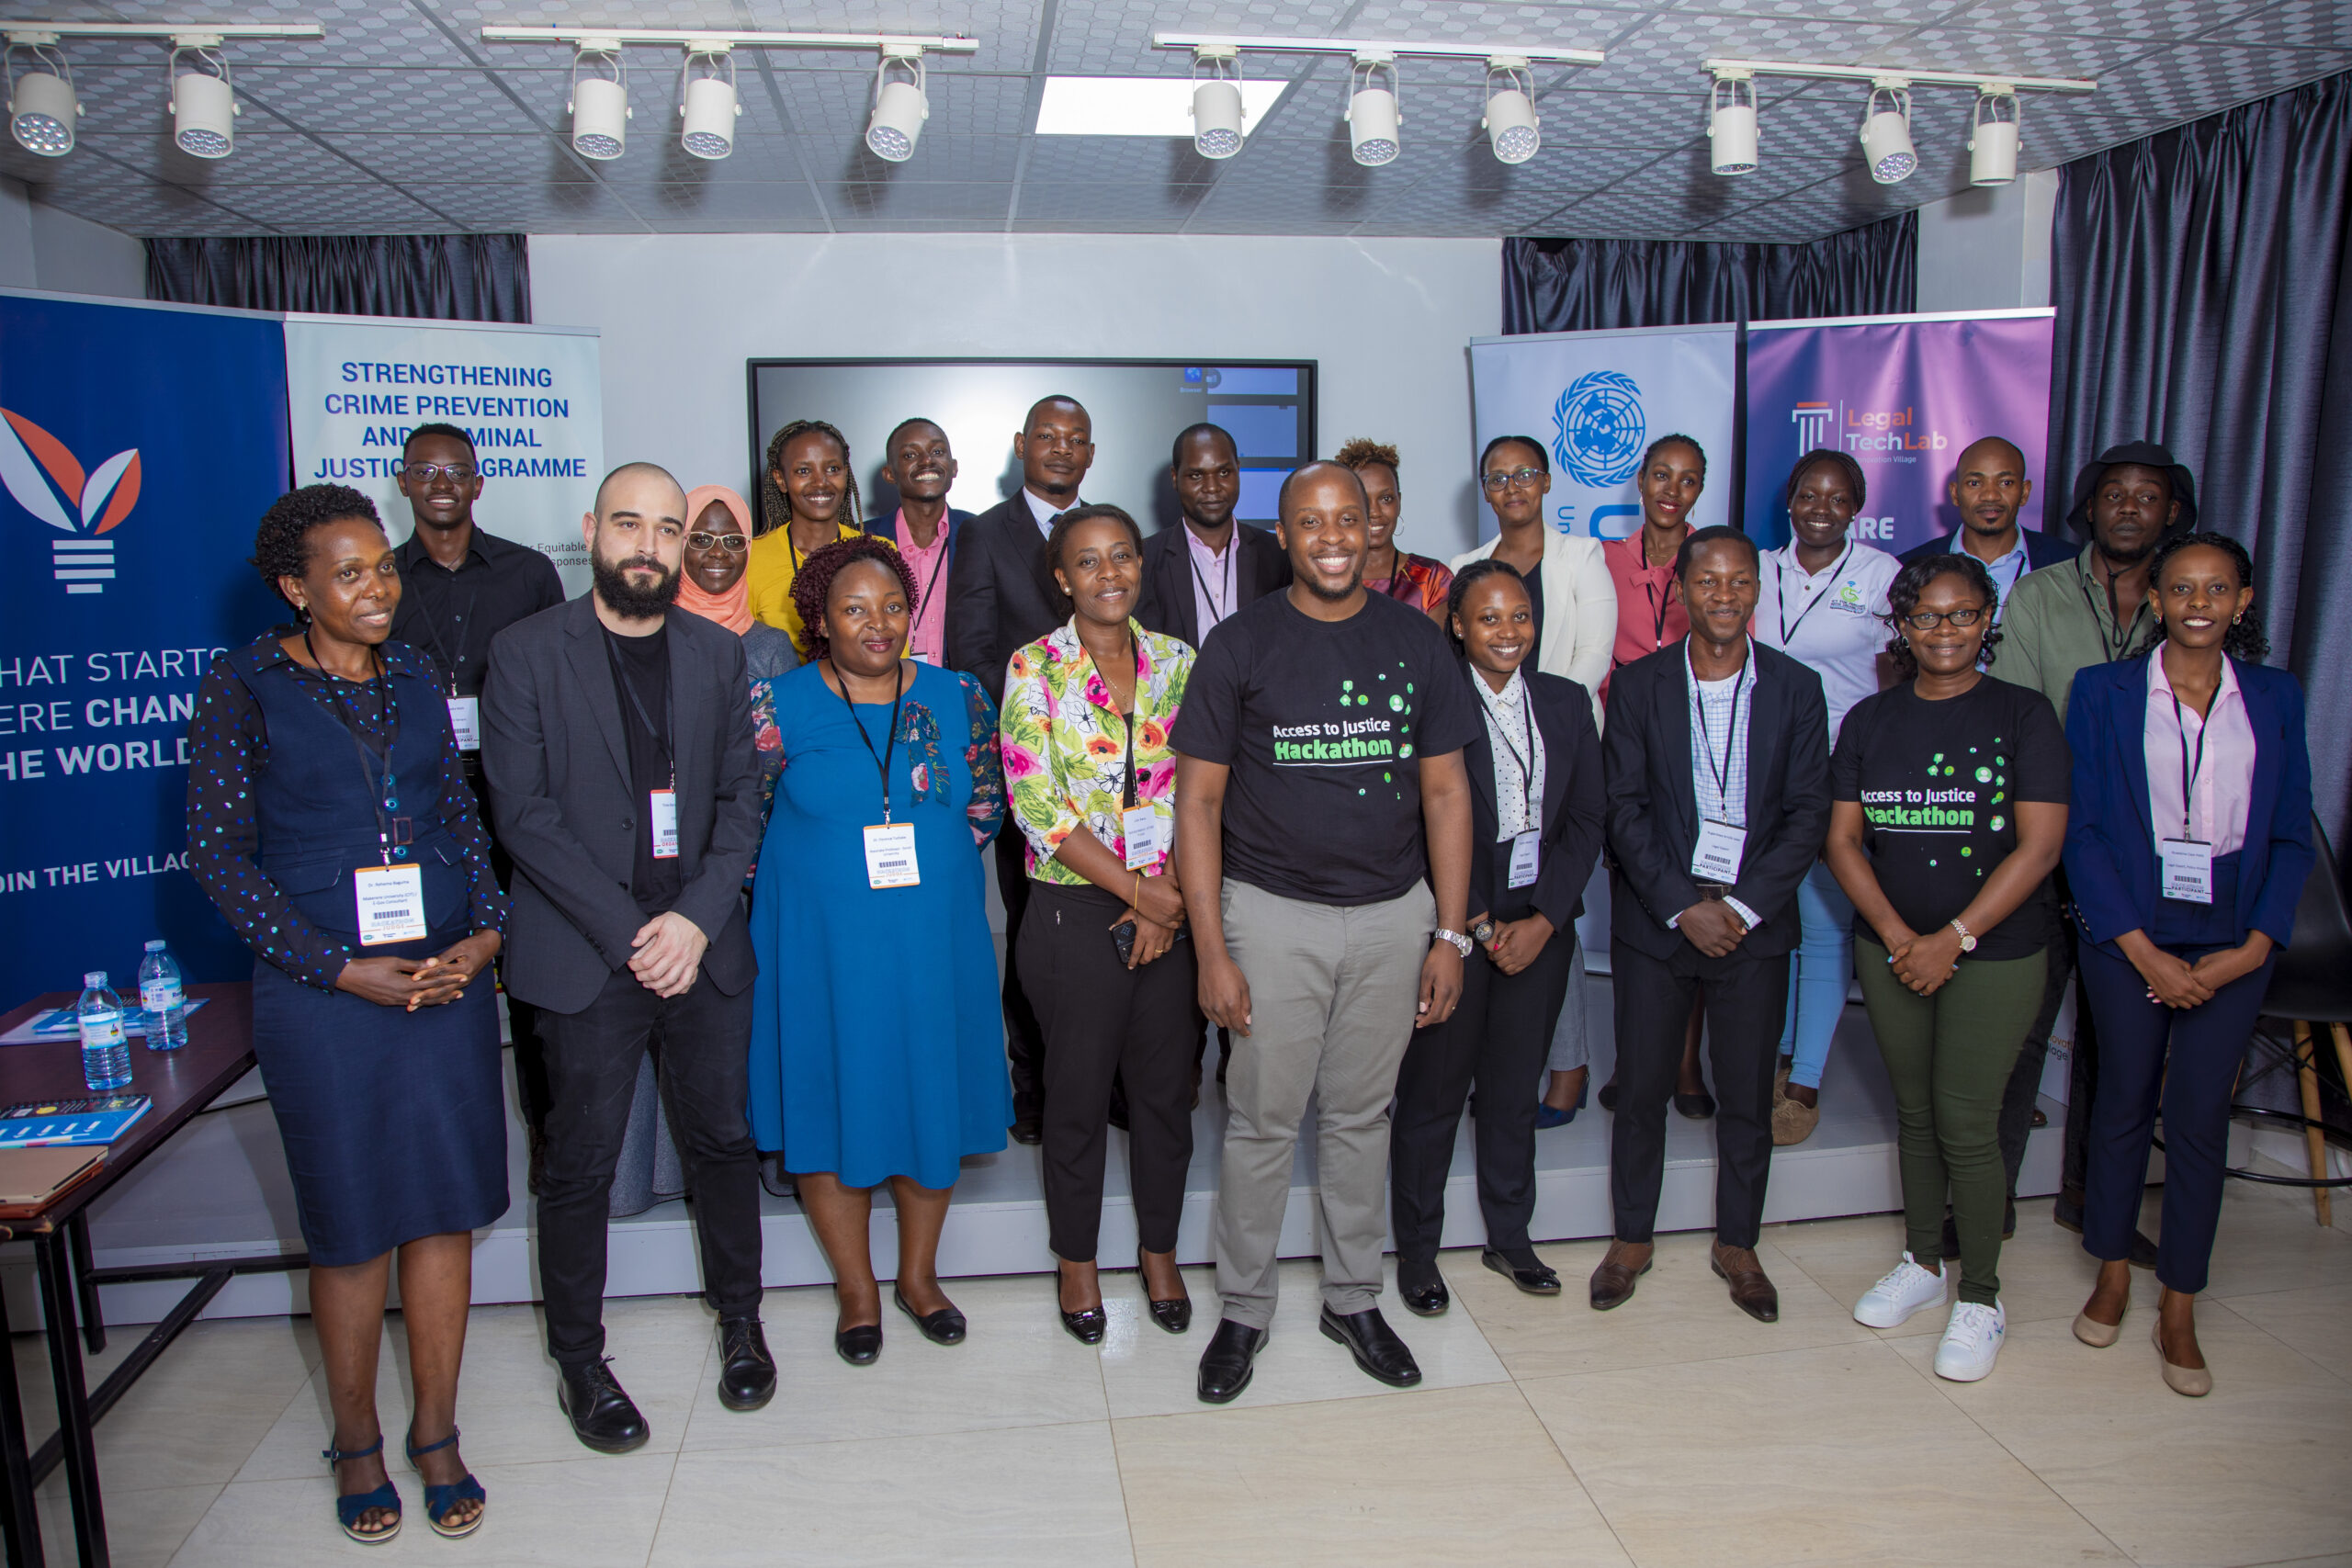 Winners of the Access to Justice hackathon that took place during the Future Lawyer Week pose for a picture with judges and partners.